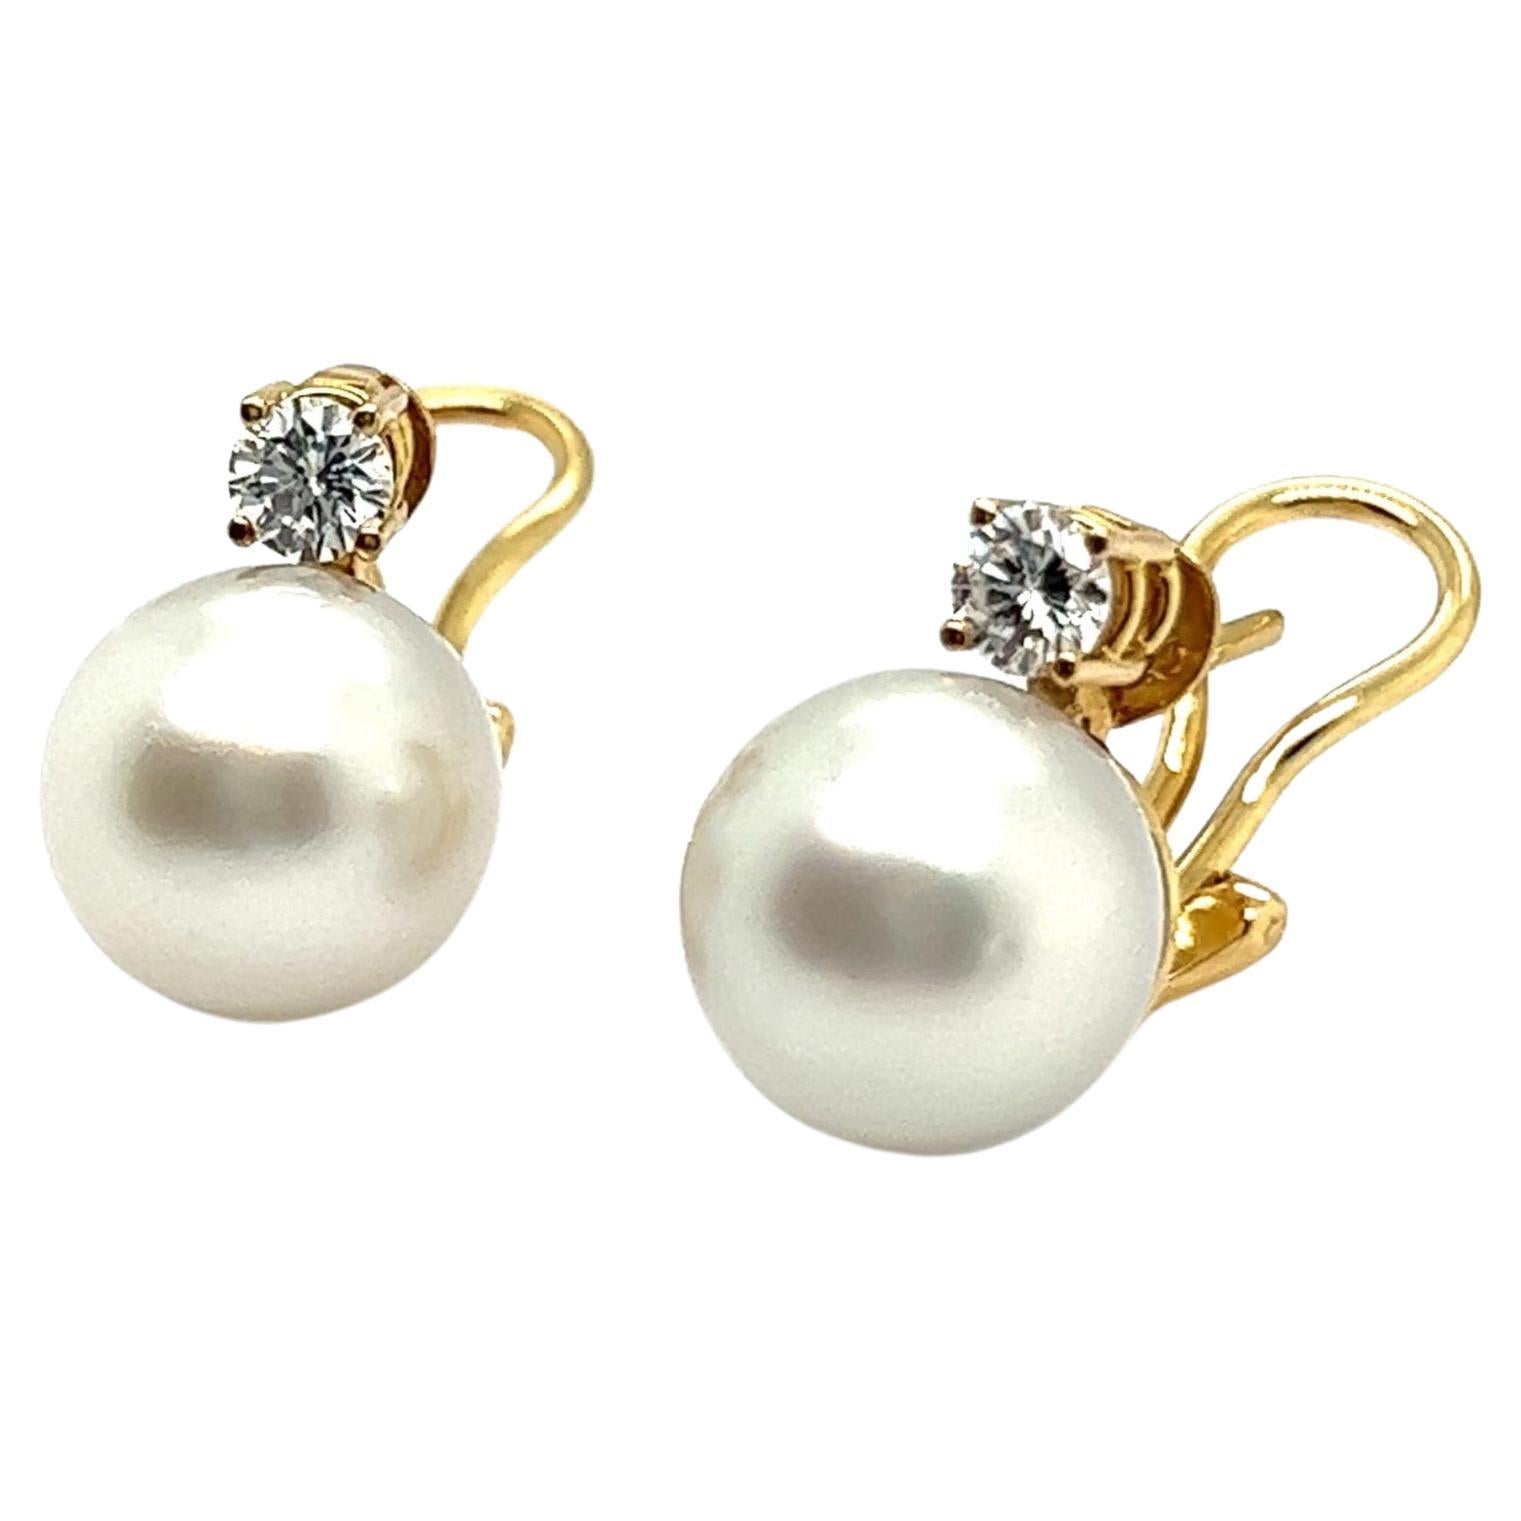 Ear clips with South Sea Pearls & Diamonds in 18 Karat Yellow Gold